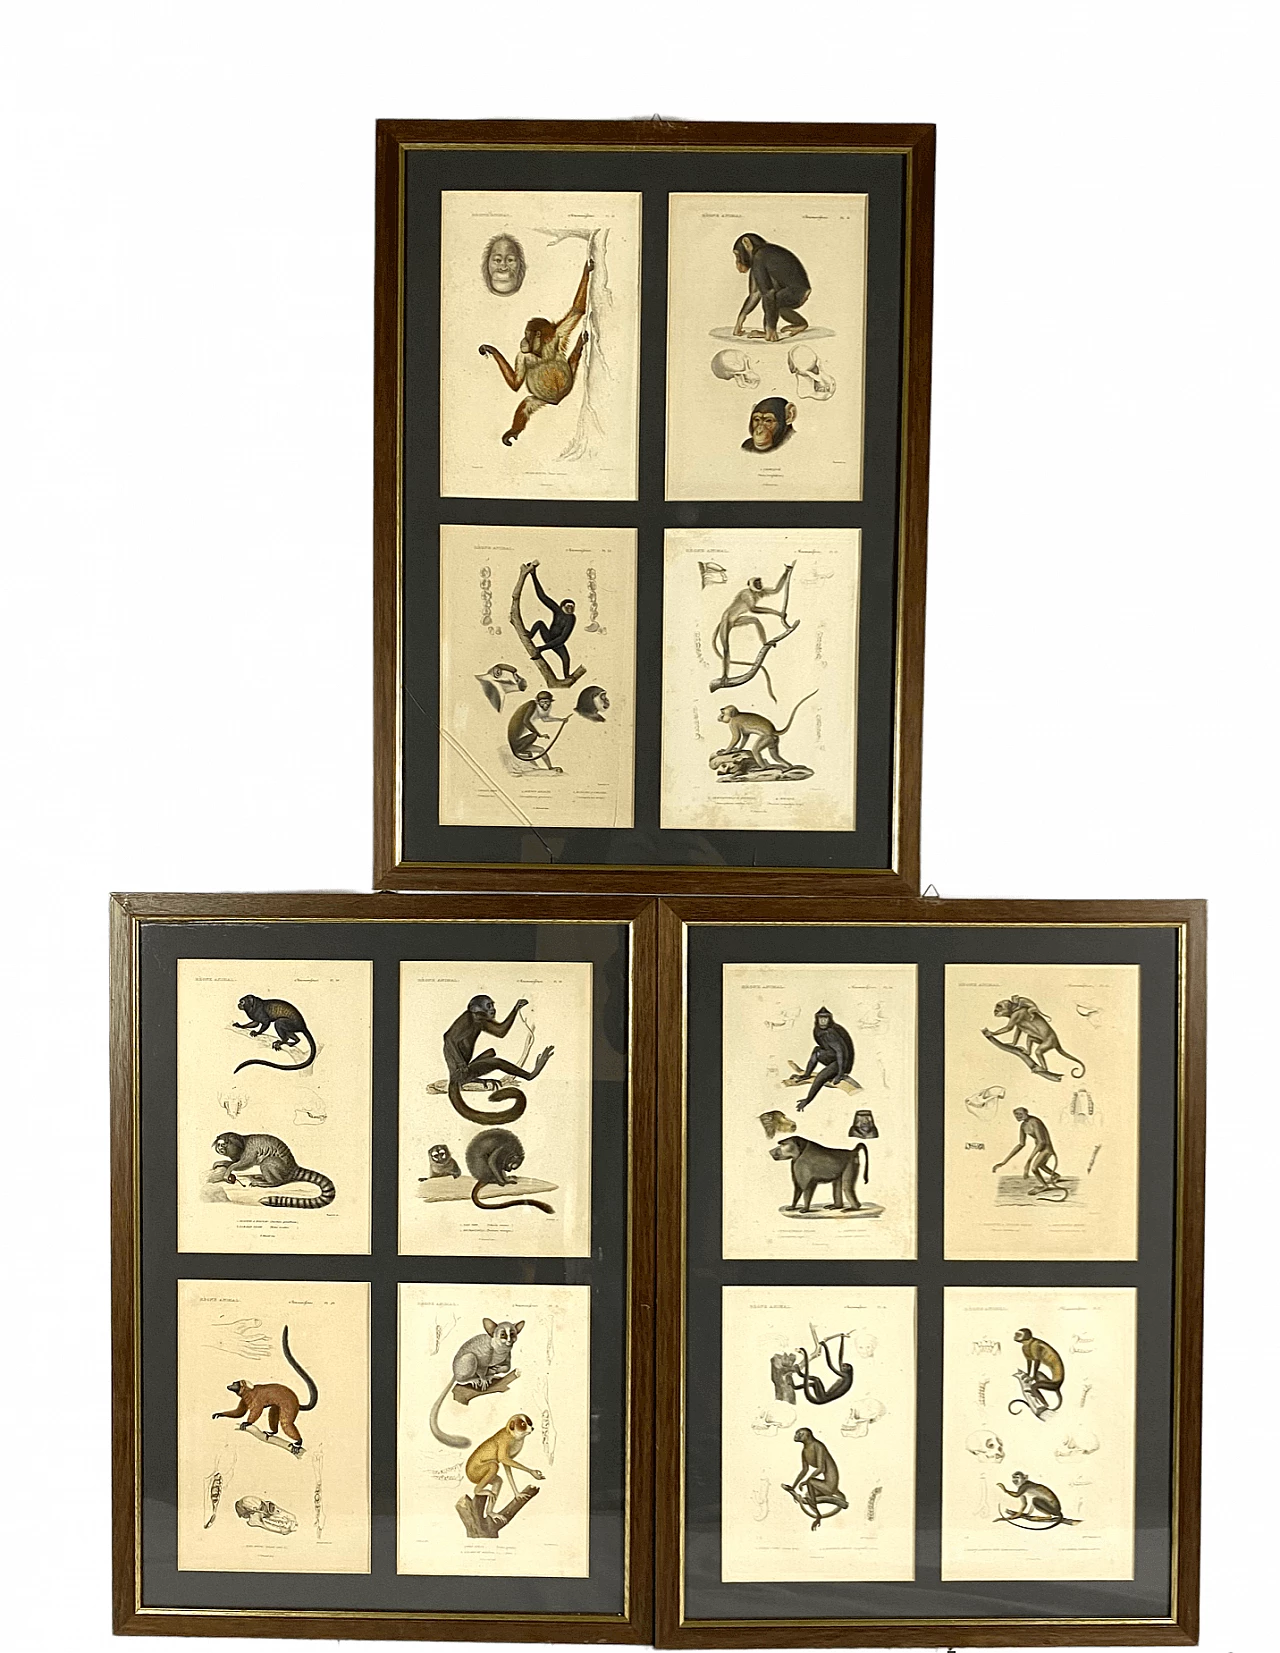 3 Framed panels with 12 engravings from "Le Règne Animal" Georges Cuvier, 19th century 1470799